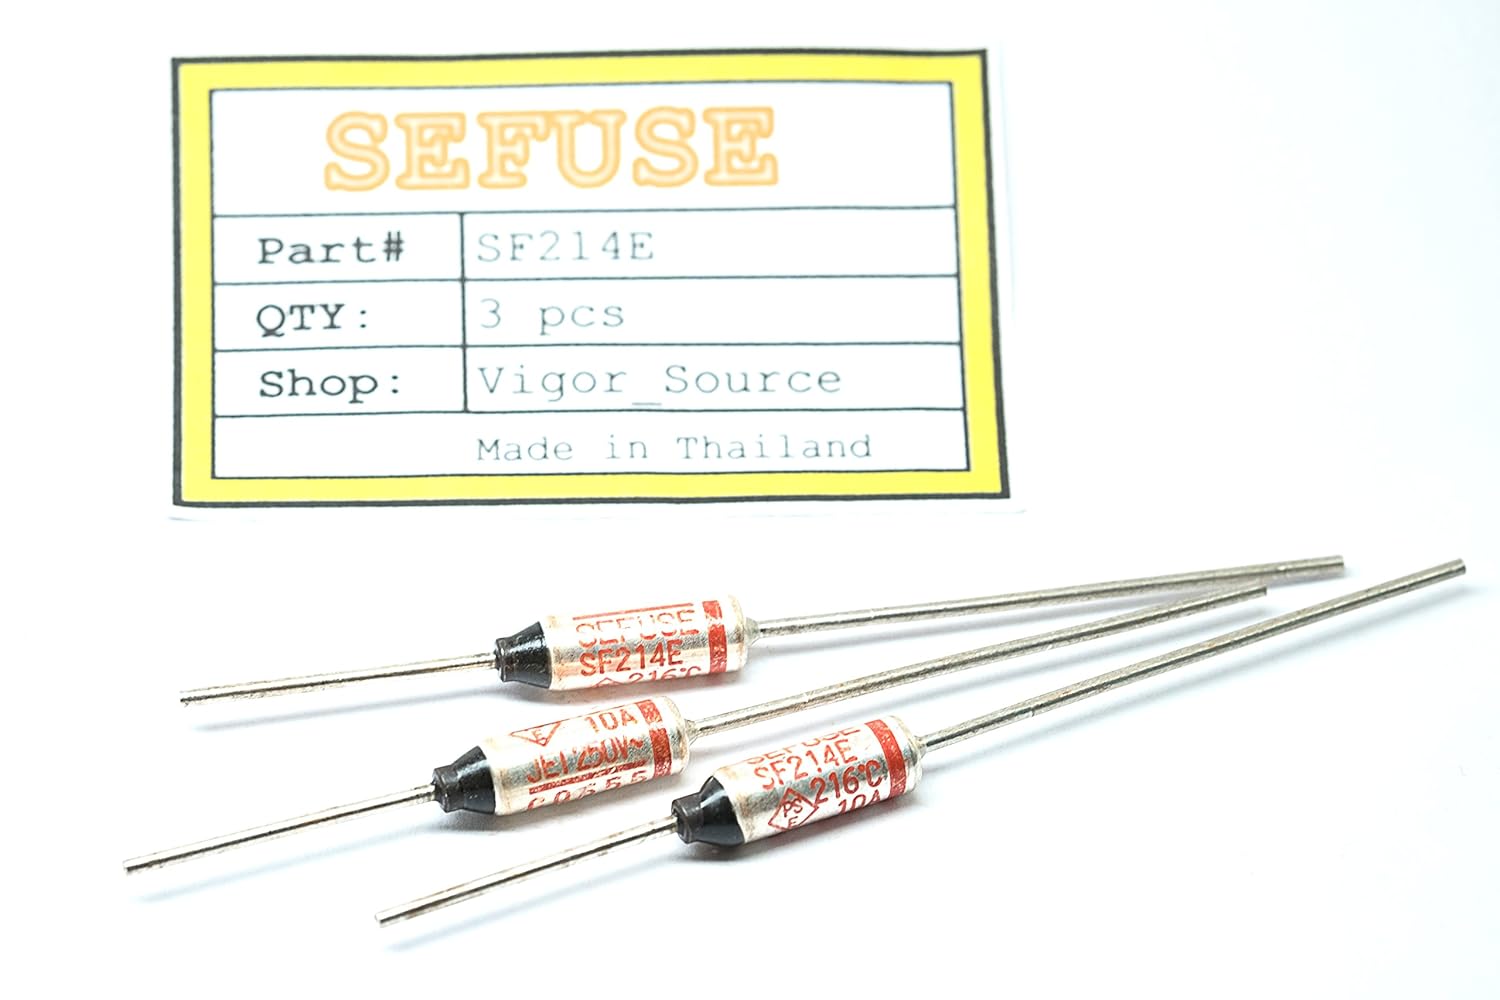 Generic Vigor_Source 3 pcs. SF214E NEC SEFUSE SF214E Thermal Fuse Thermal Cut Out 216C Cutoff 216 Degree 10A 250V (Rated Voltage: 110V